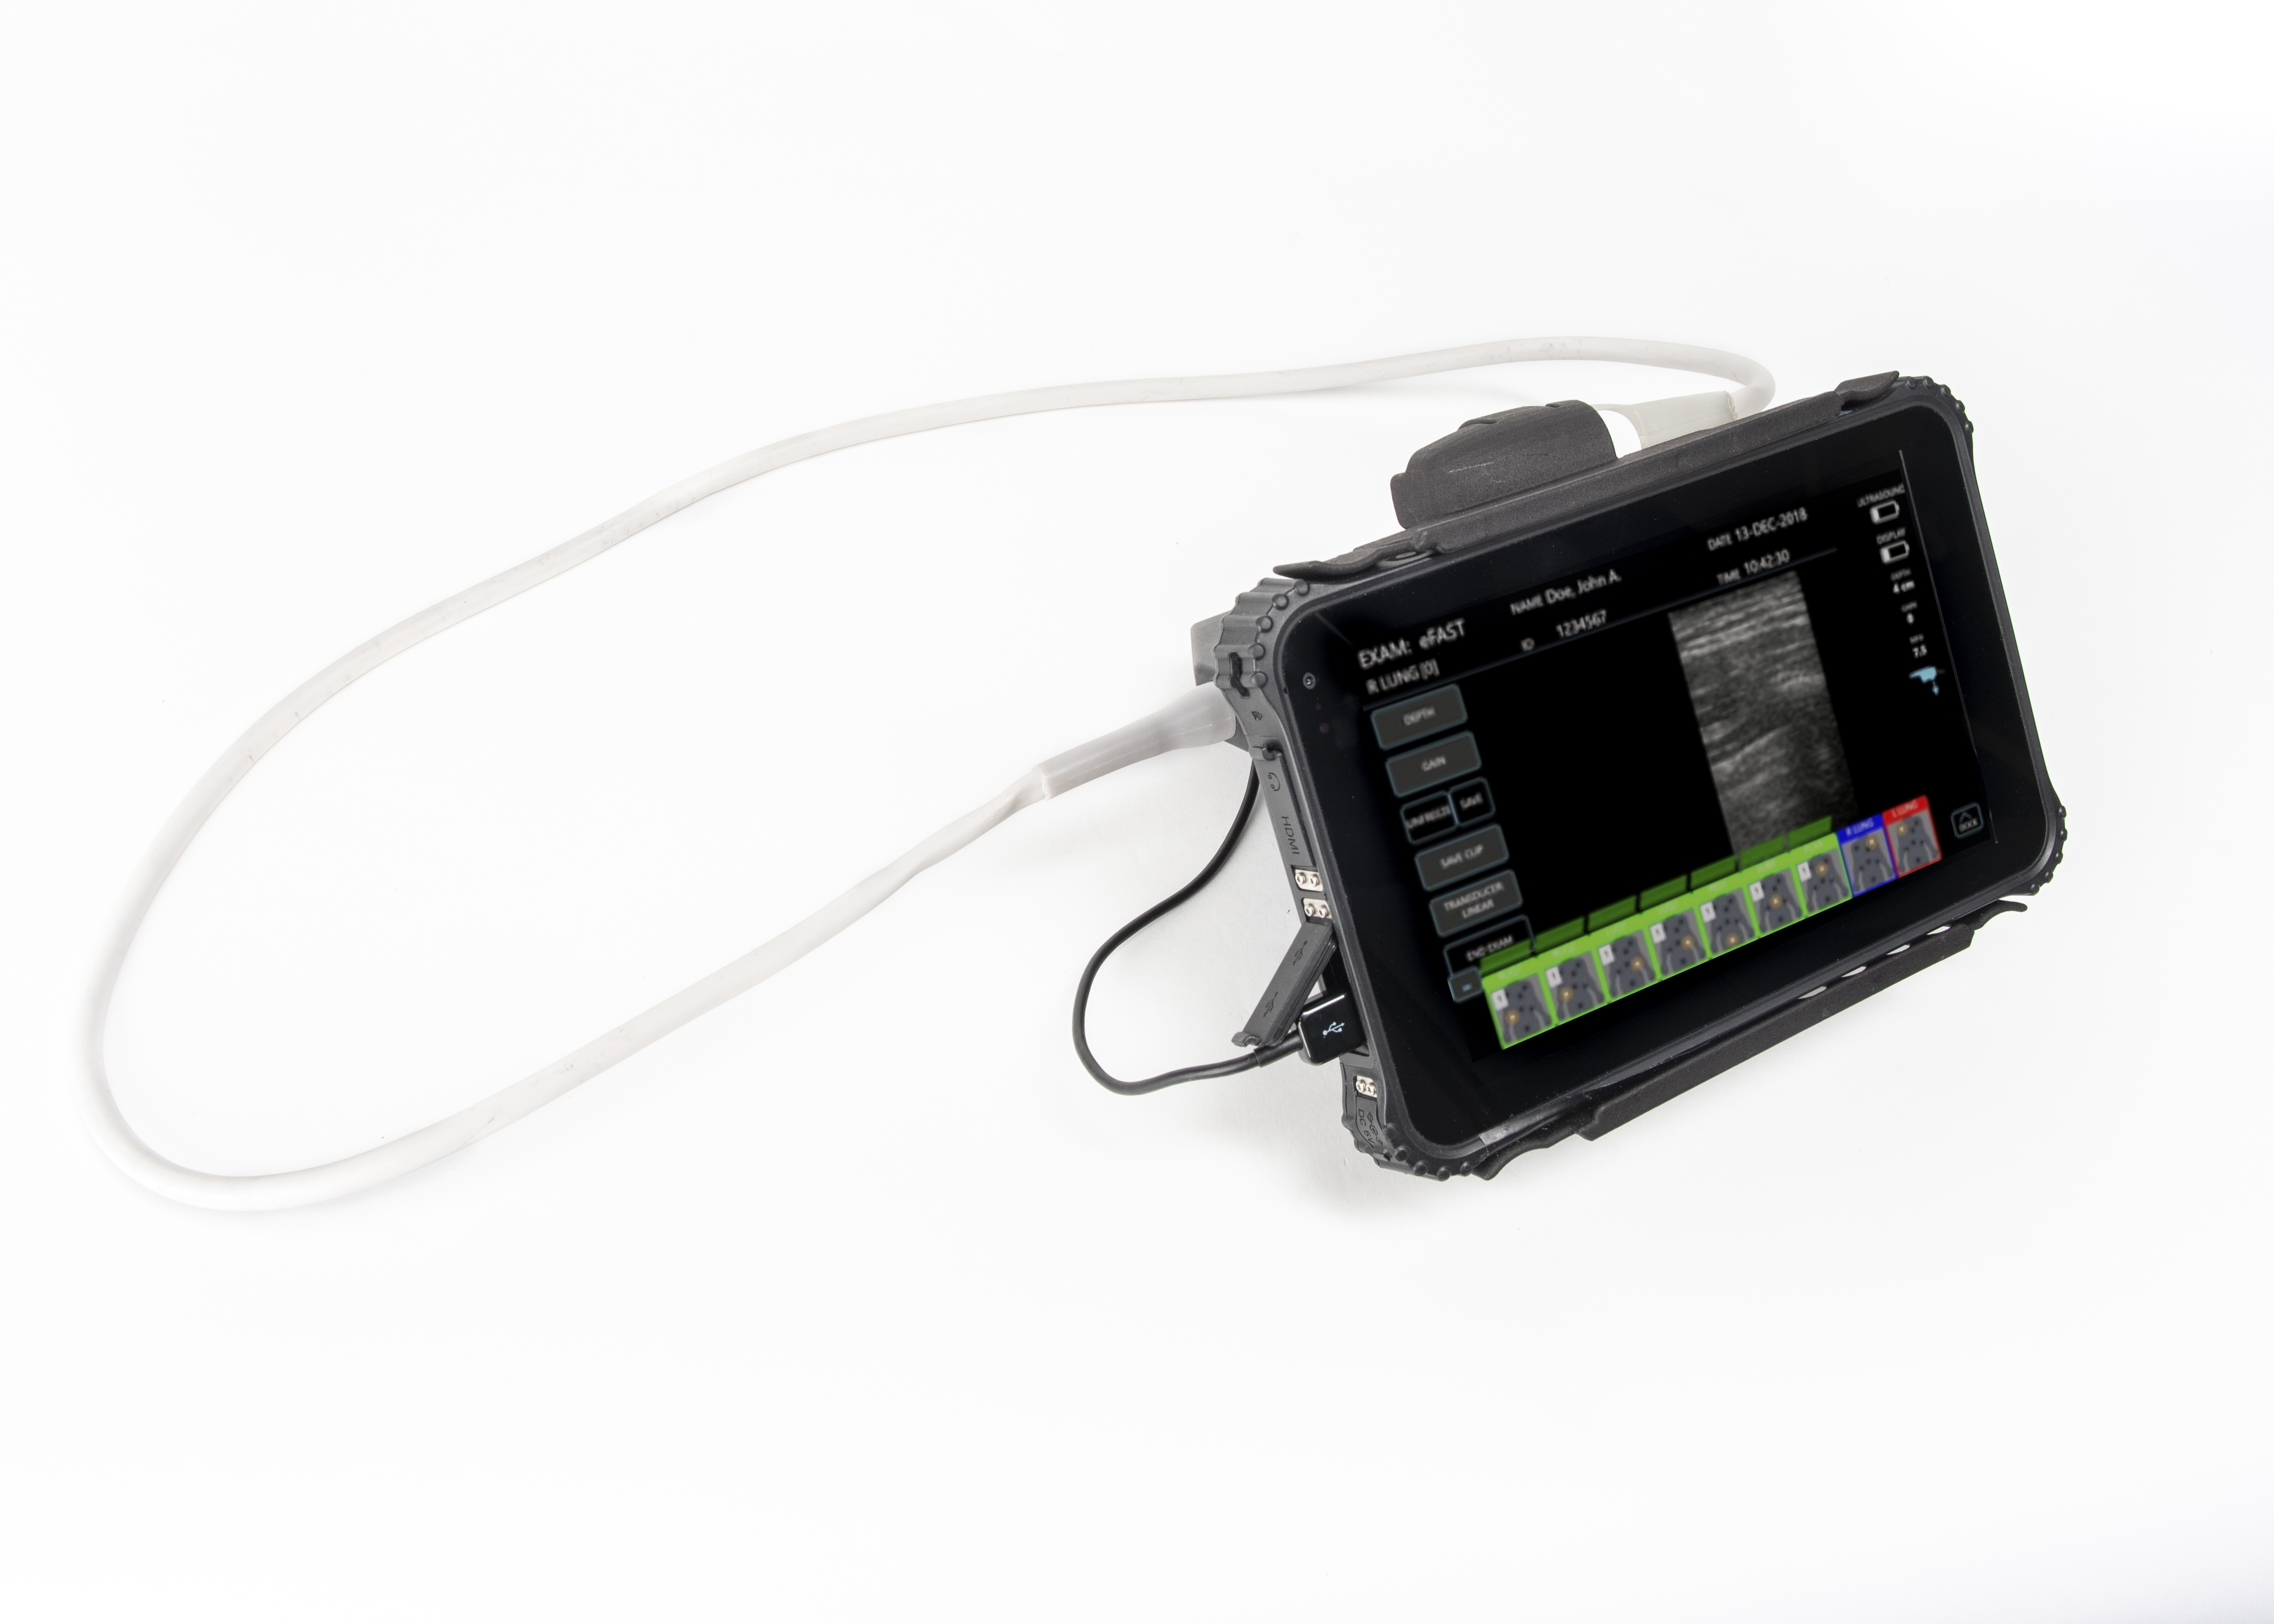 Sonivate SonicEye Dual-Array Ultrasound System